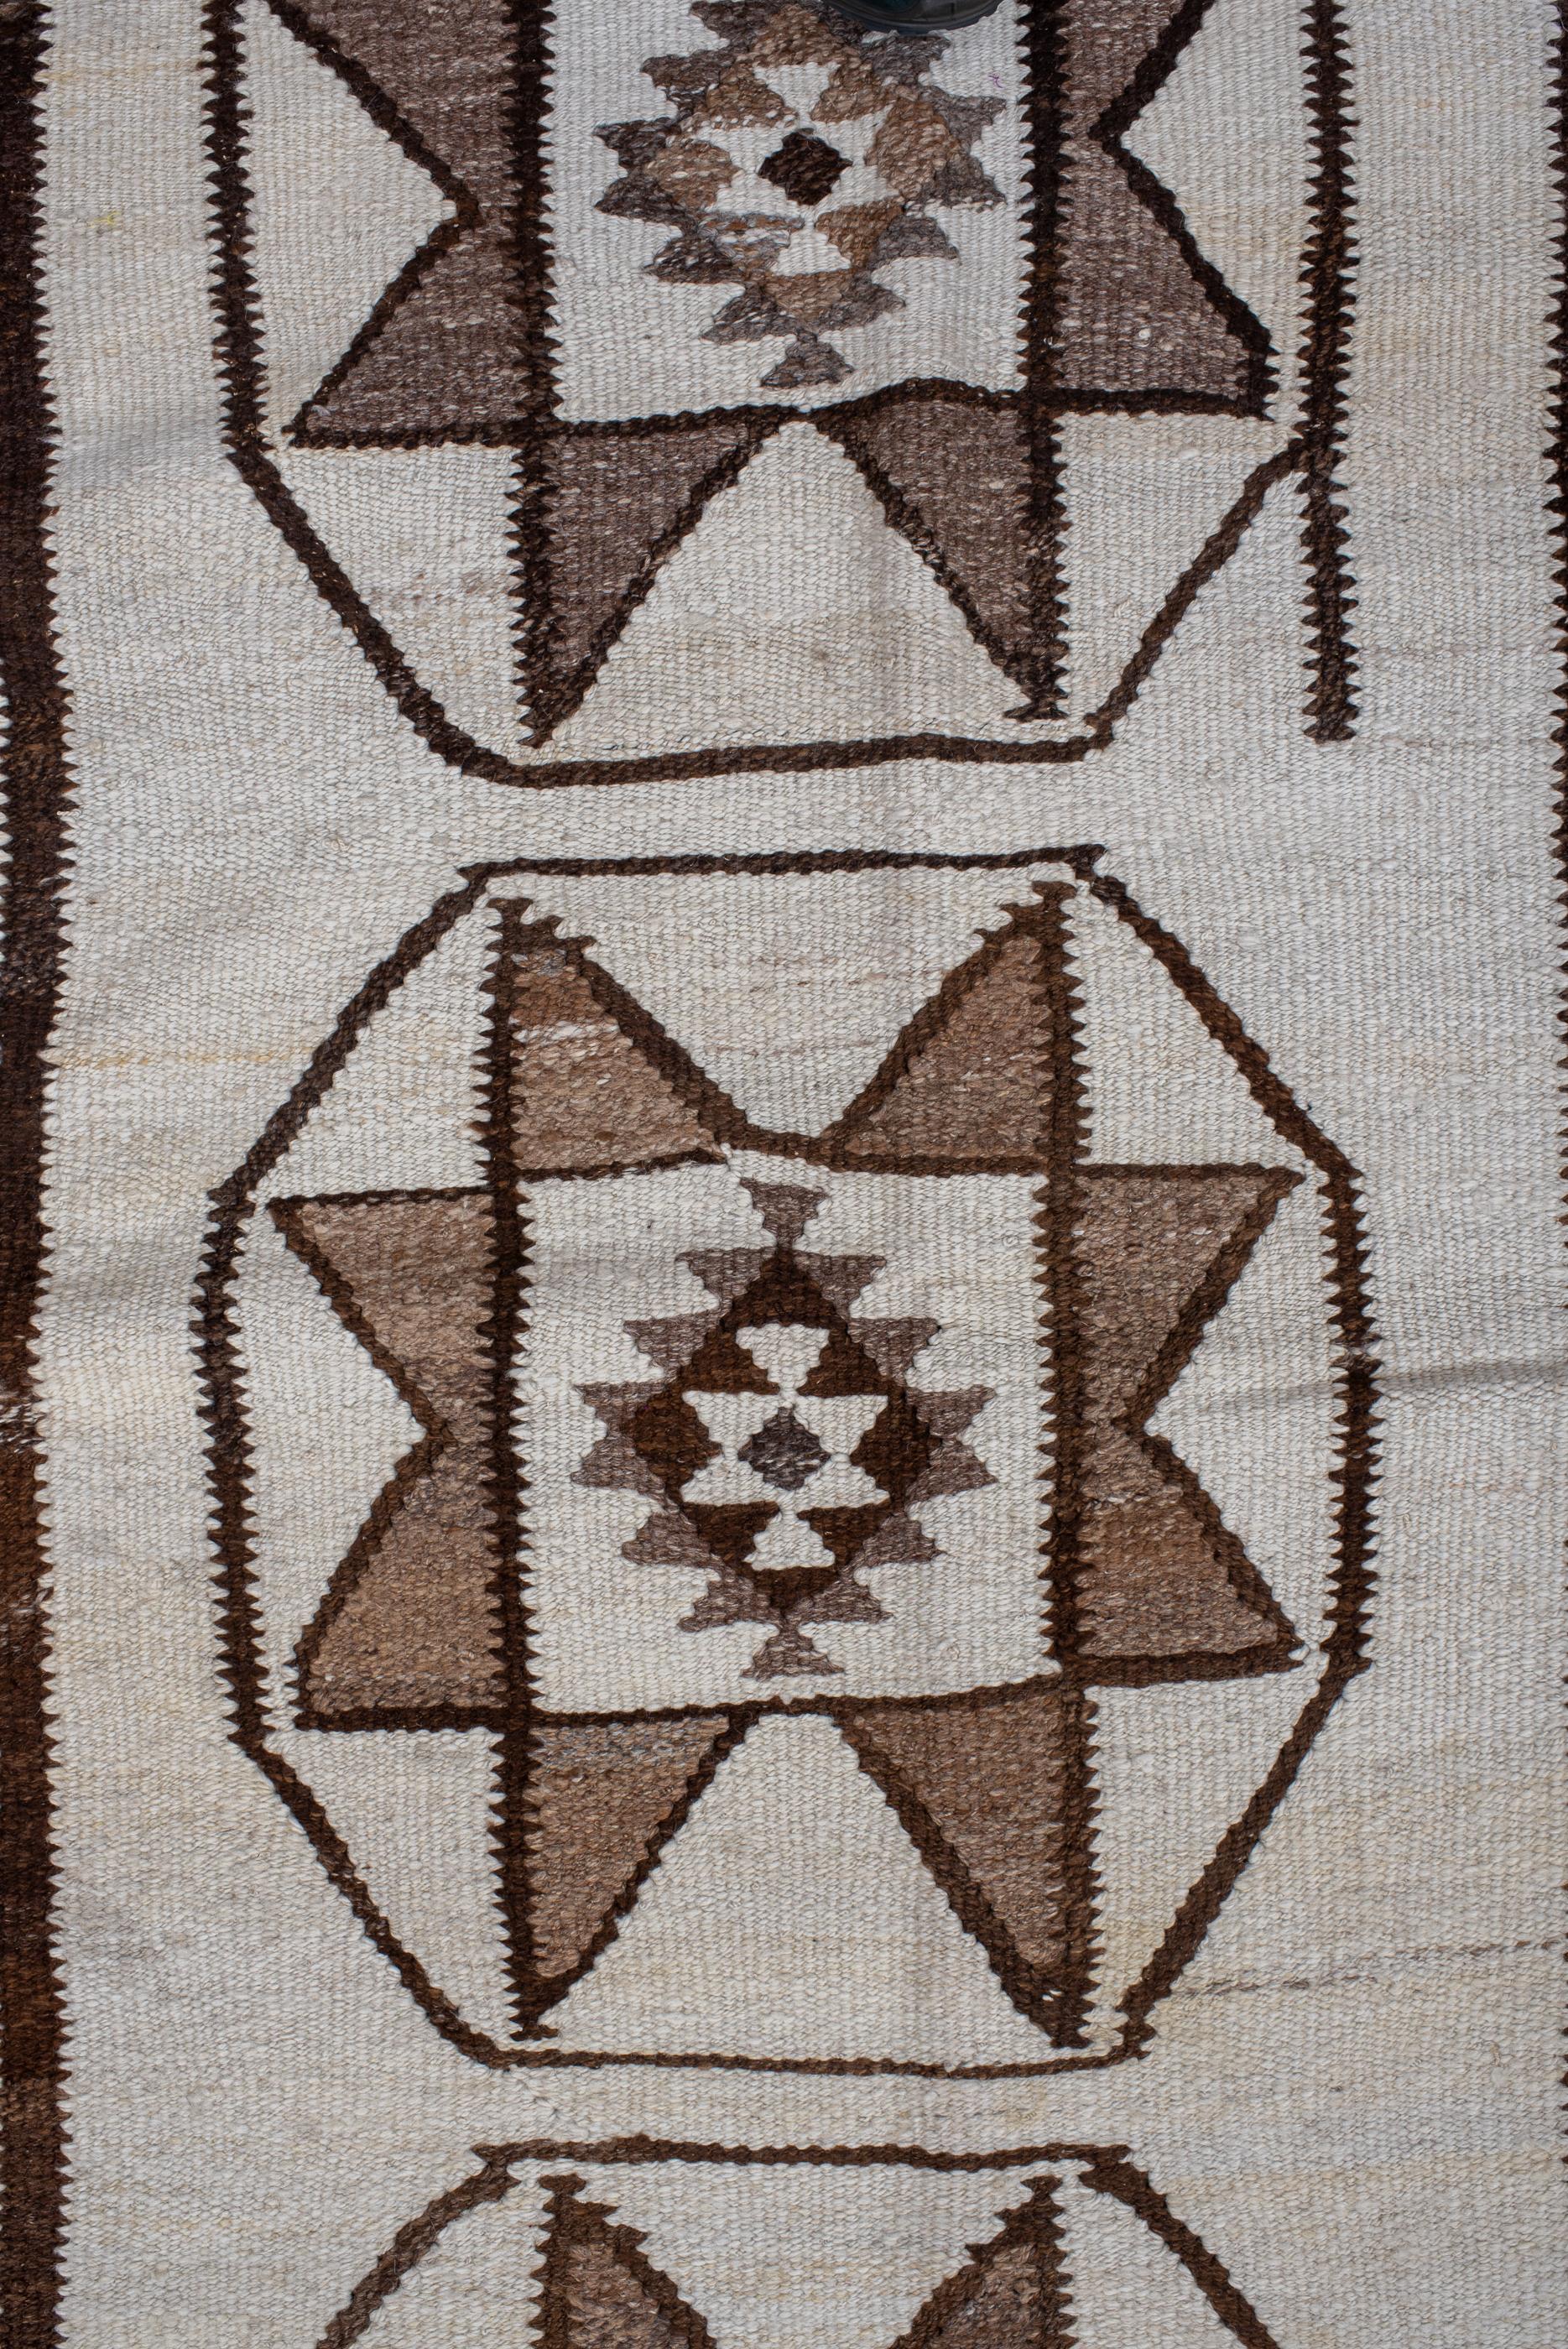 Hand-Knotted Antique Kilim Runner with Cream Field and Tassels on Ends